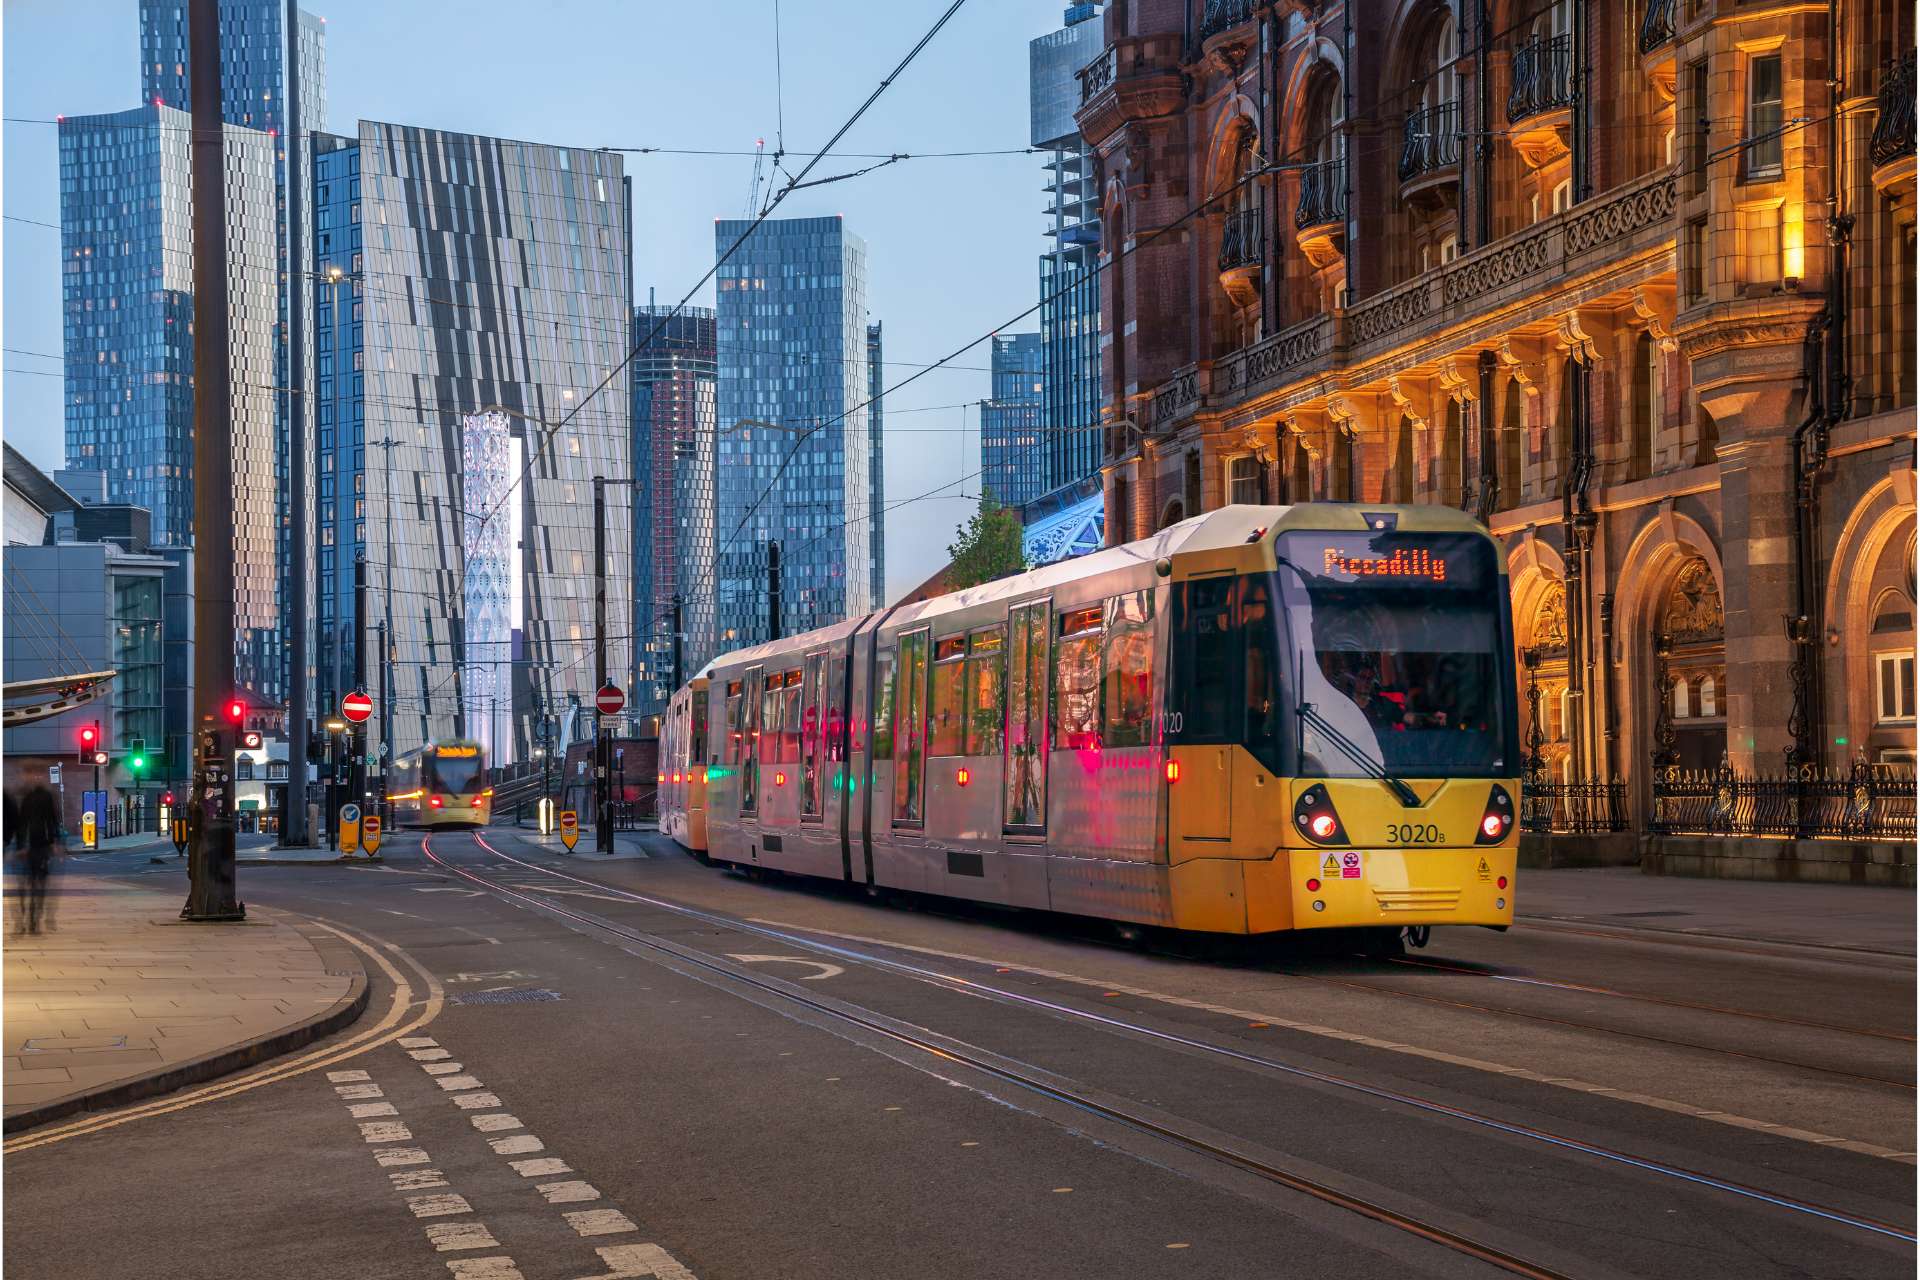 Manchester Piccadilly Tram in Manchester City Centre